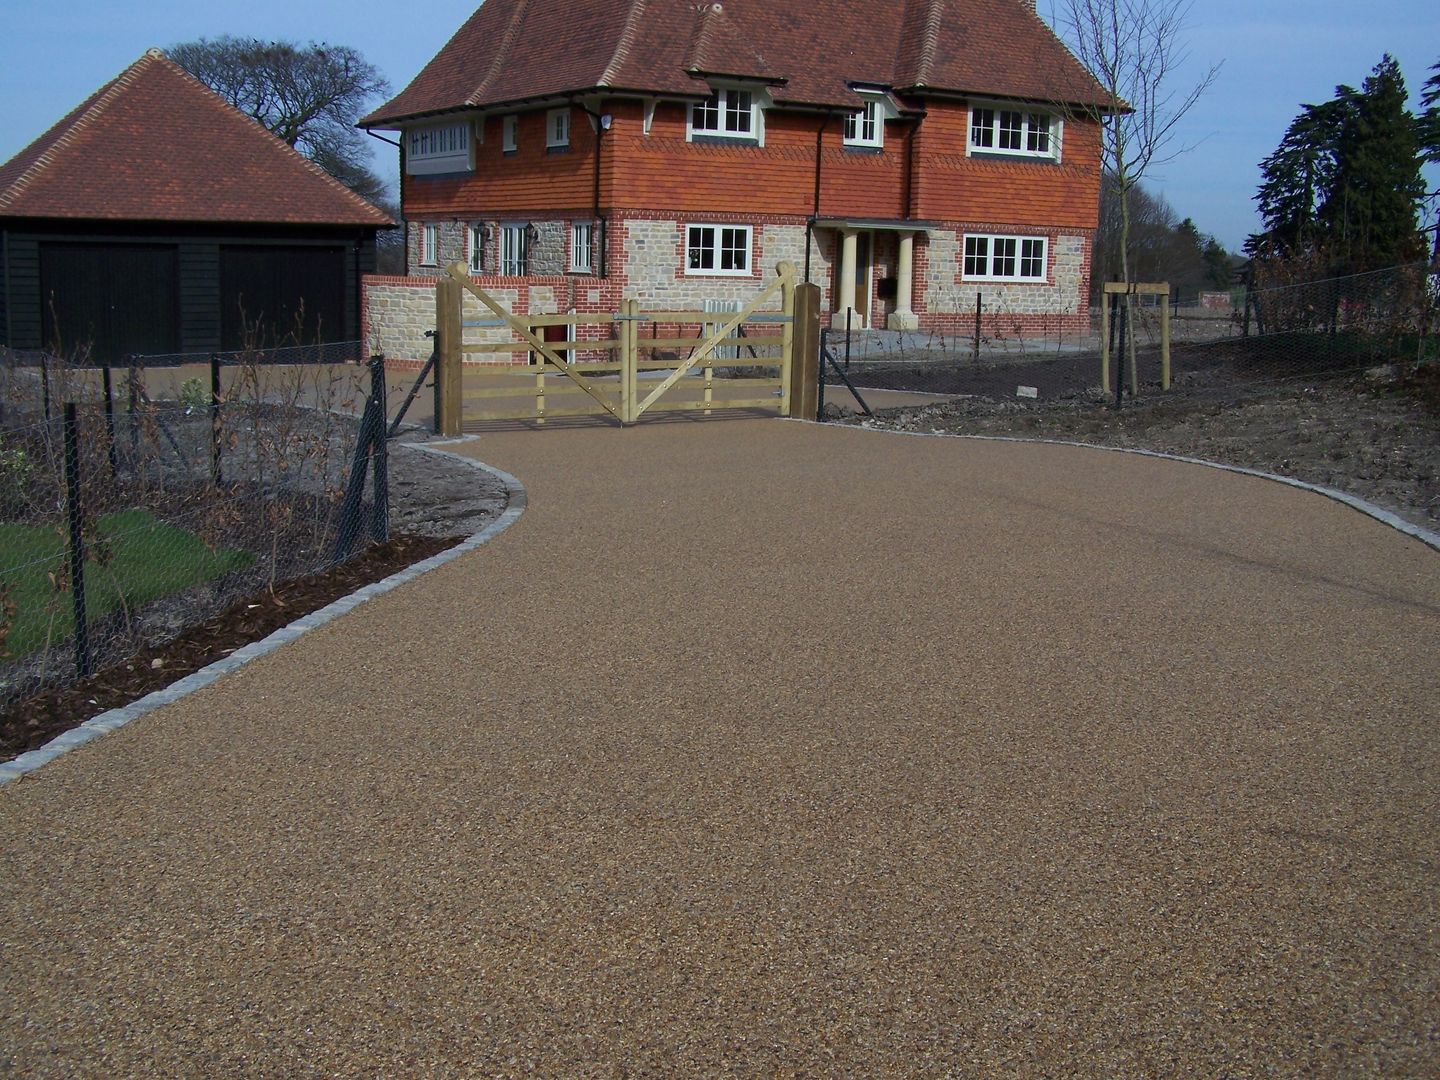 Domestic Driveways installation of resin bound paving, Permeable Paving Solutions UK Permeable Paving Solutions UK Стіни